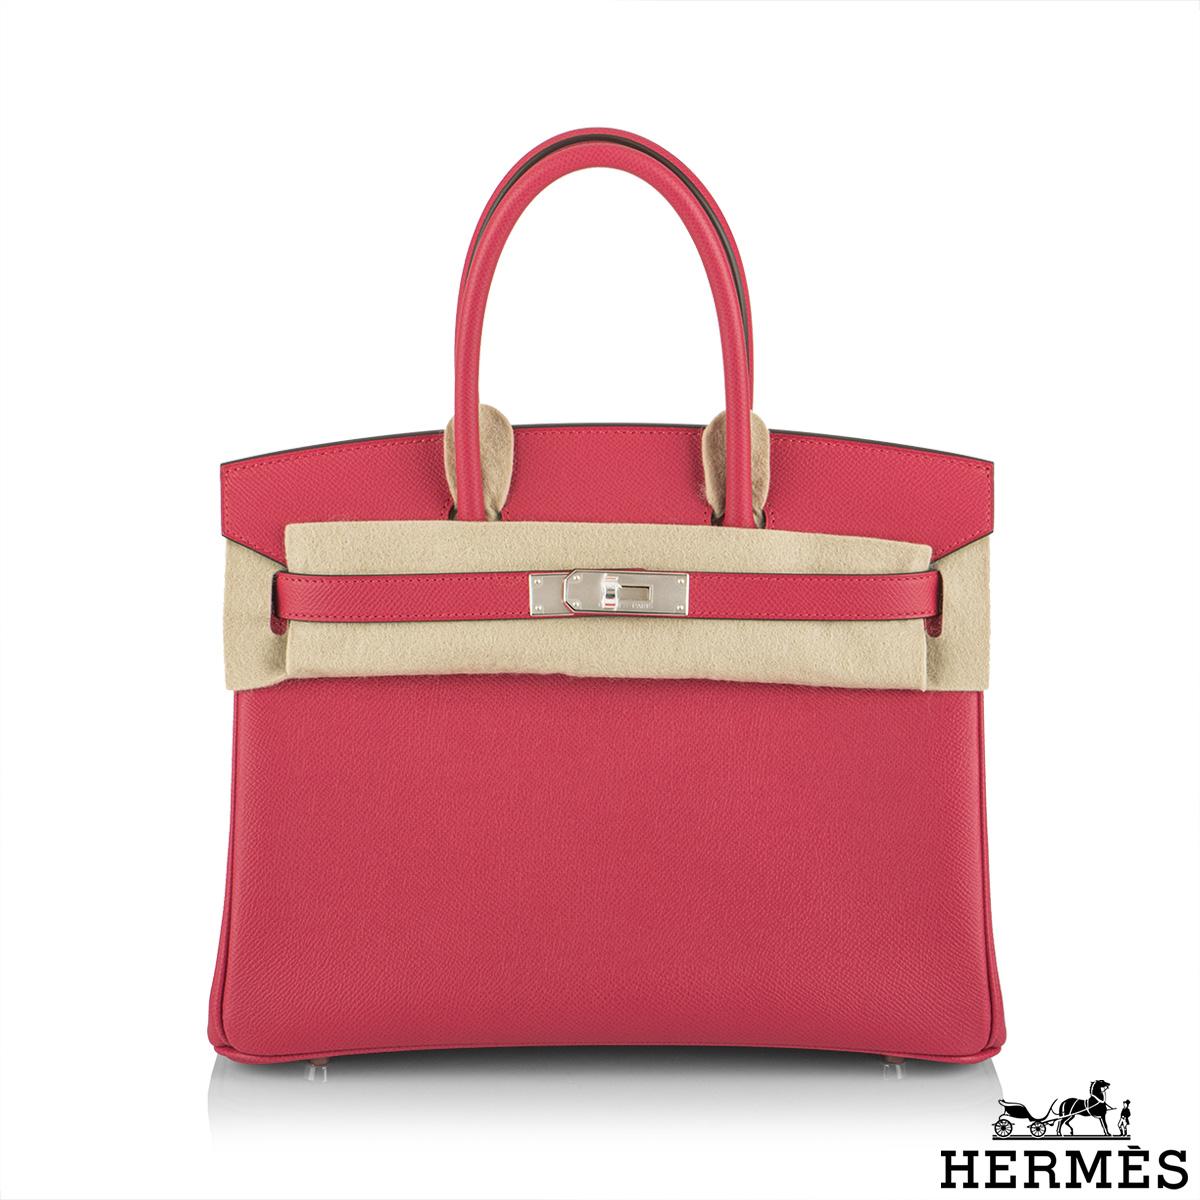 An exquisite Hermès 30cm Birkin bag. The exterior of this Birkin features epsom leather in rose extreme and is detailed with palladium hardware. The exterior of this Birkin has tonal stitching, two straps with front toggle closure. The interior